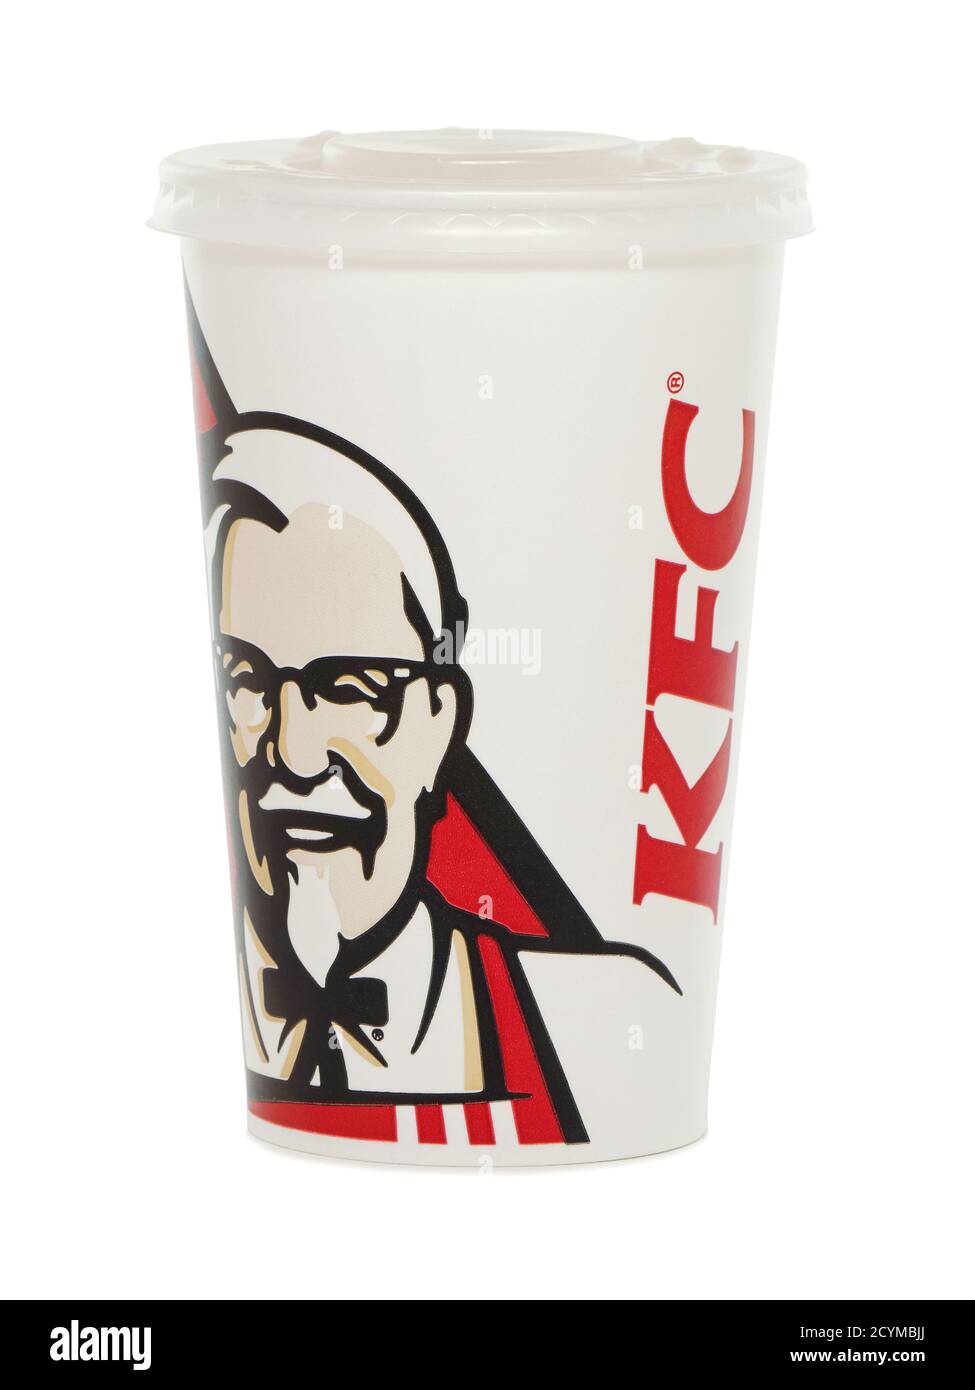 BUCHAREST, ROMANIA - September 1, 2015. KFC soda paper cup with colonel Sanders on it. KFC, Kentucky Fried Chicken, is a fast food restaurant chain th Stock Photo